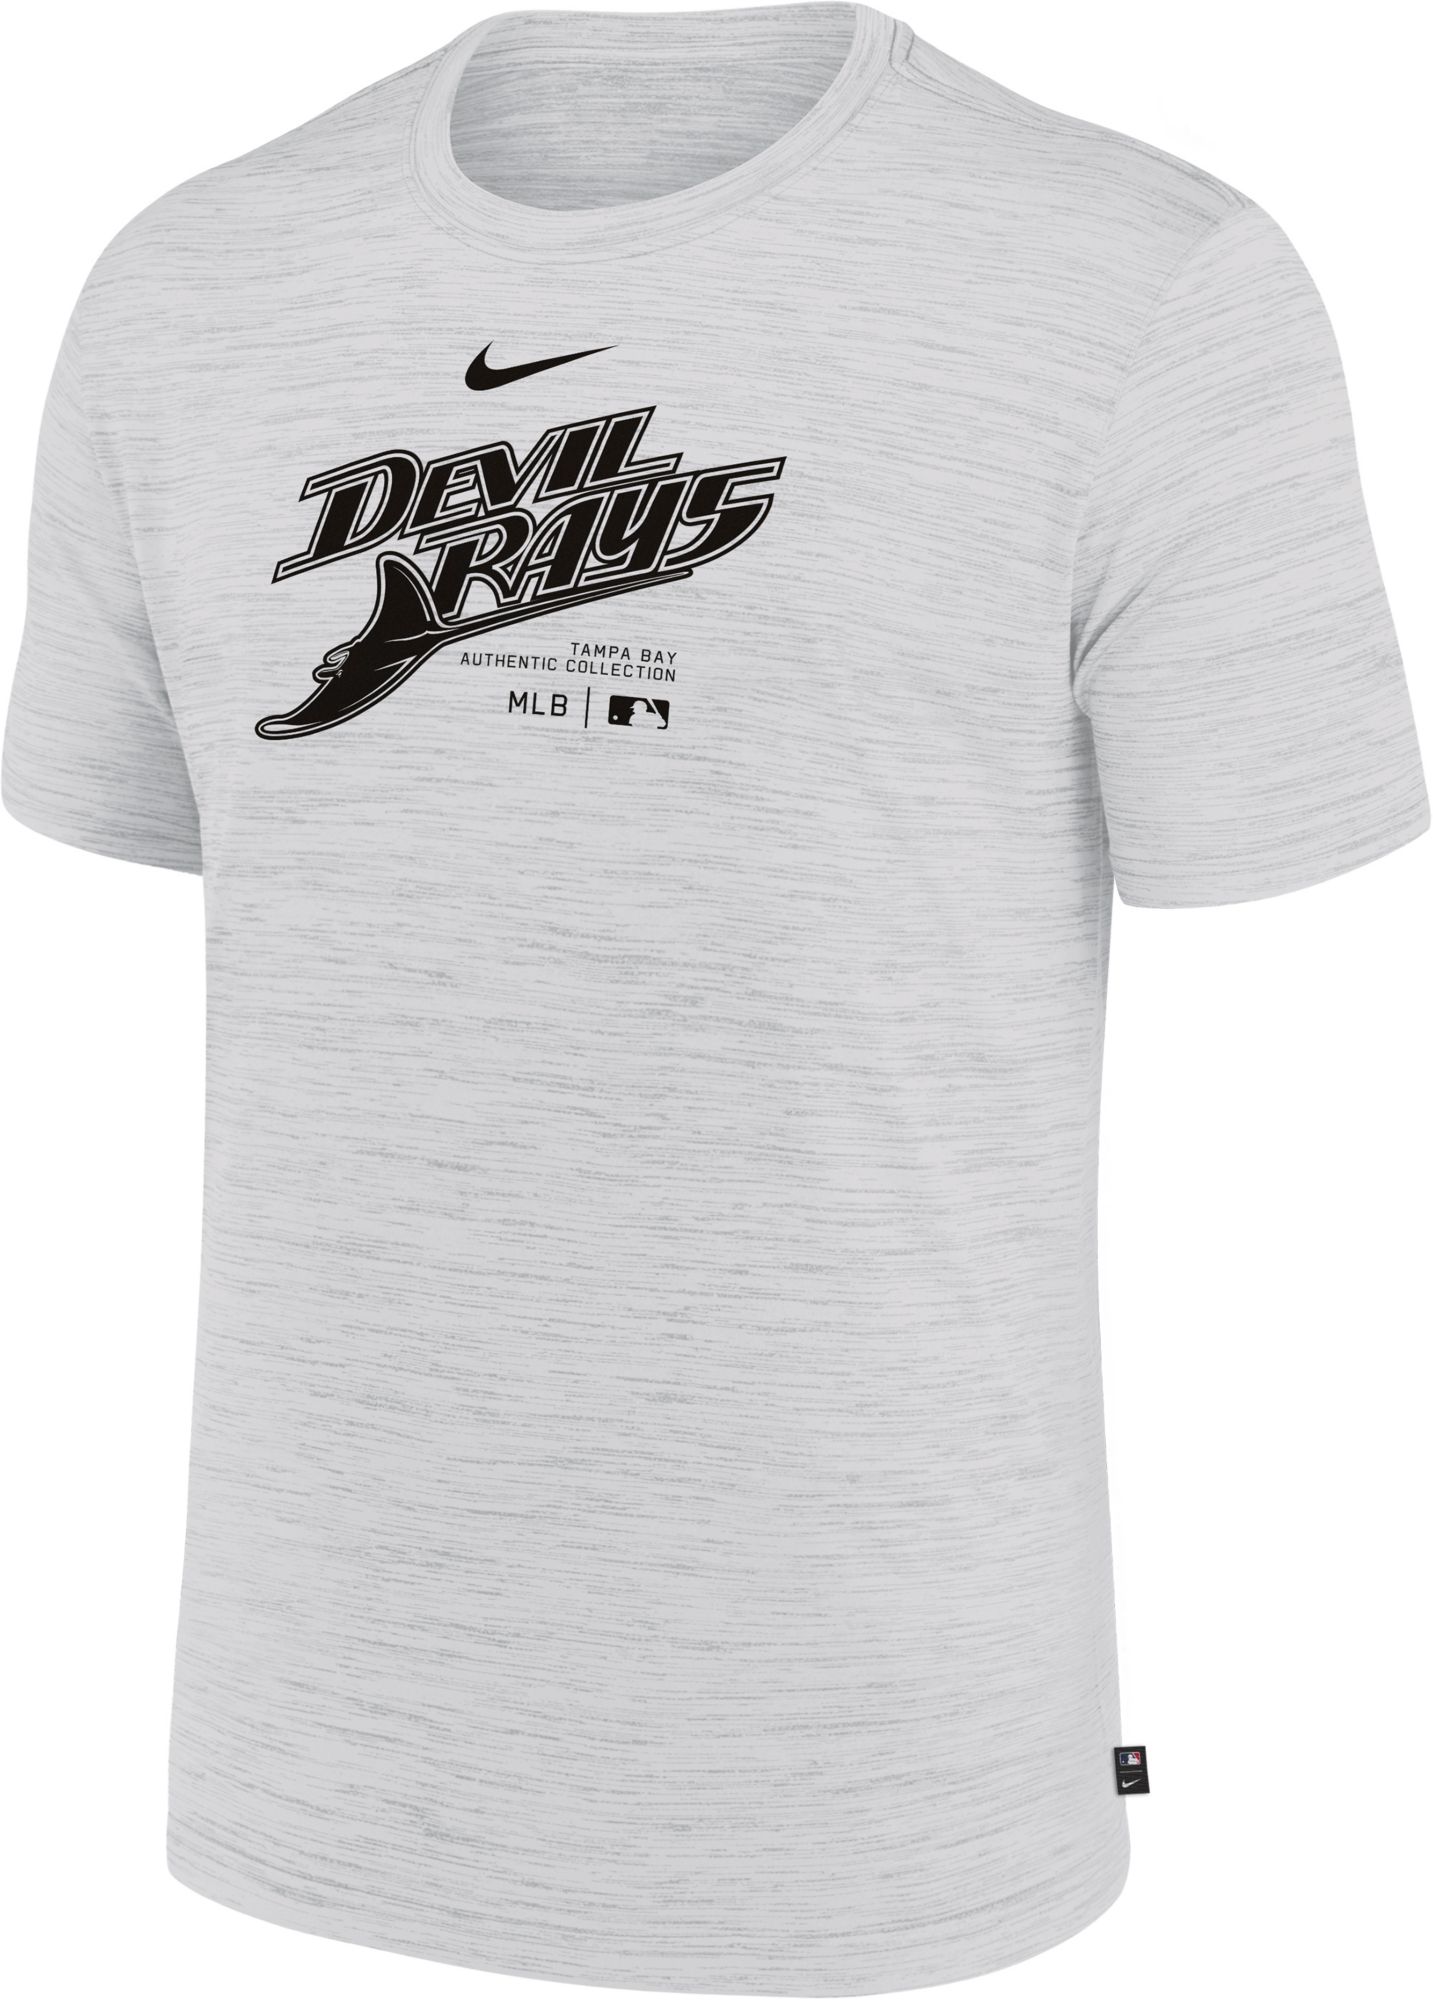 Nike Men's Tampa Bay Rays Authentic Collection Velocity T-Shirt